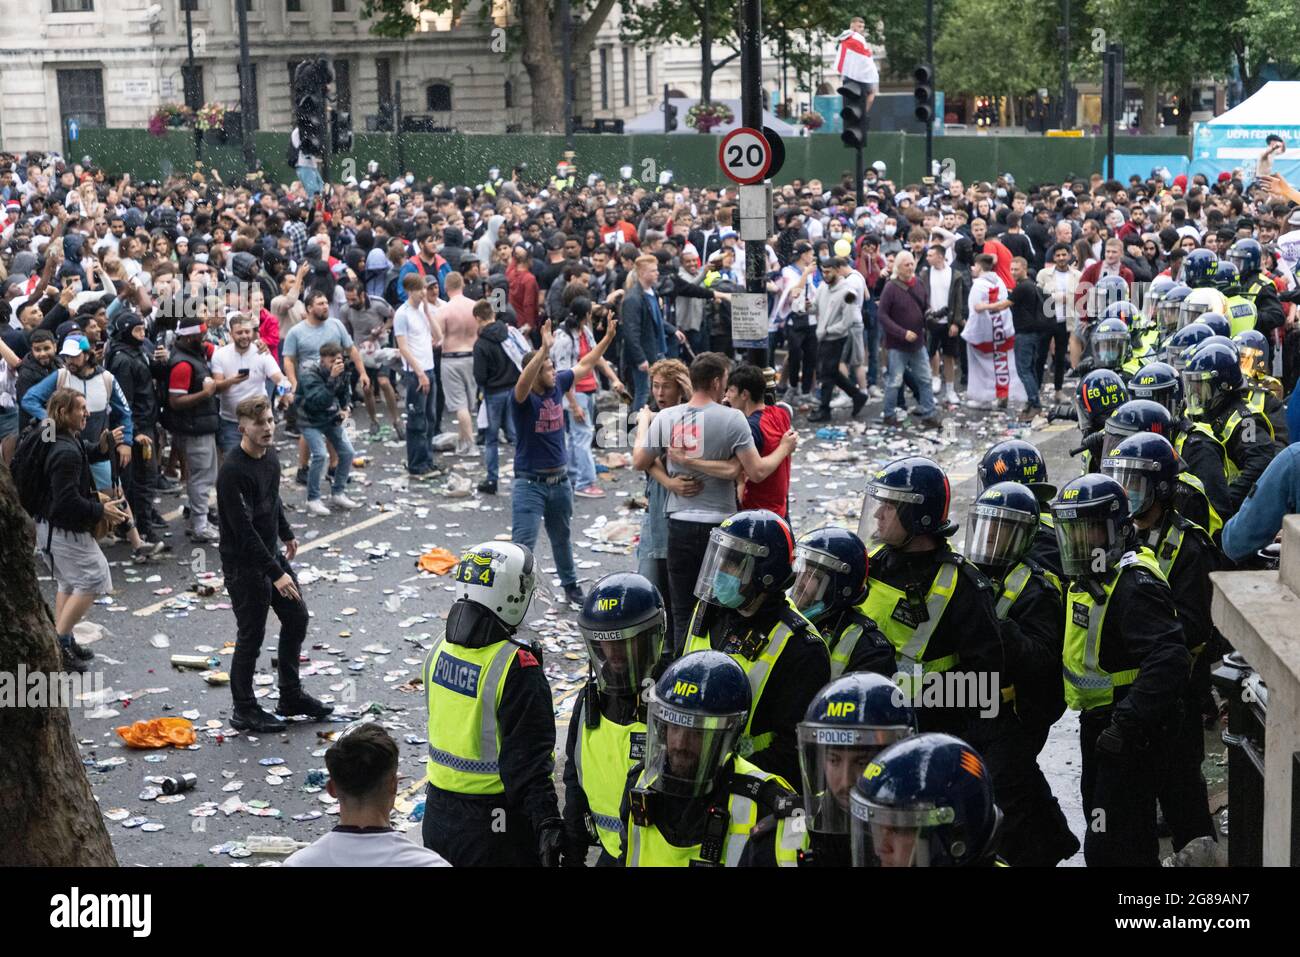 Police clash with football fans during the England vs Italy Euro 2020 ...